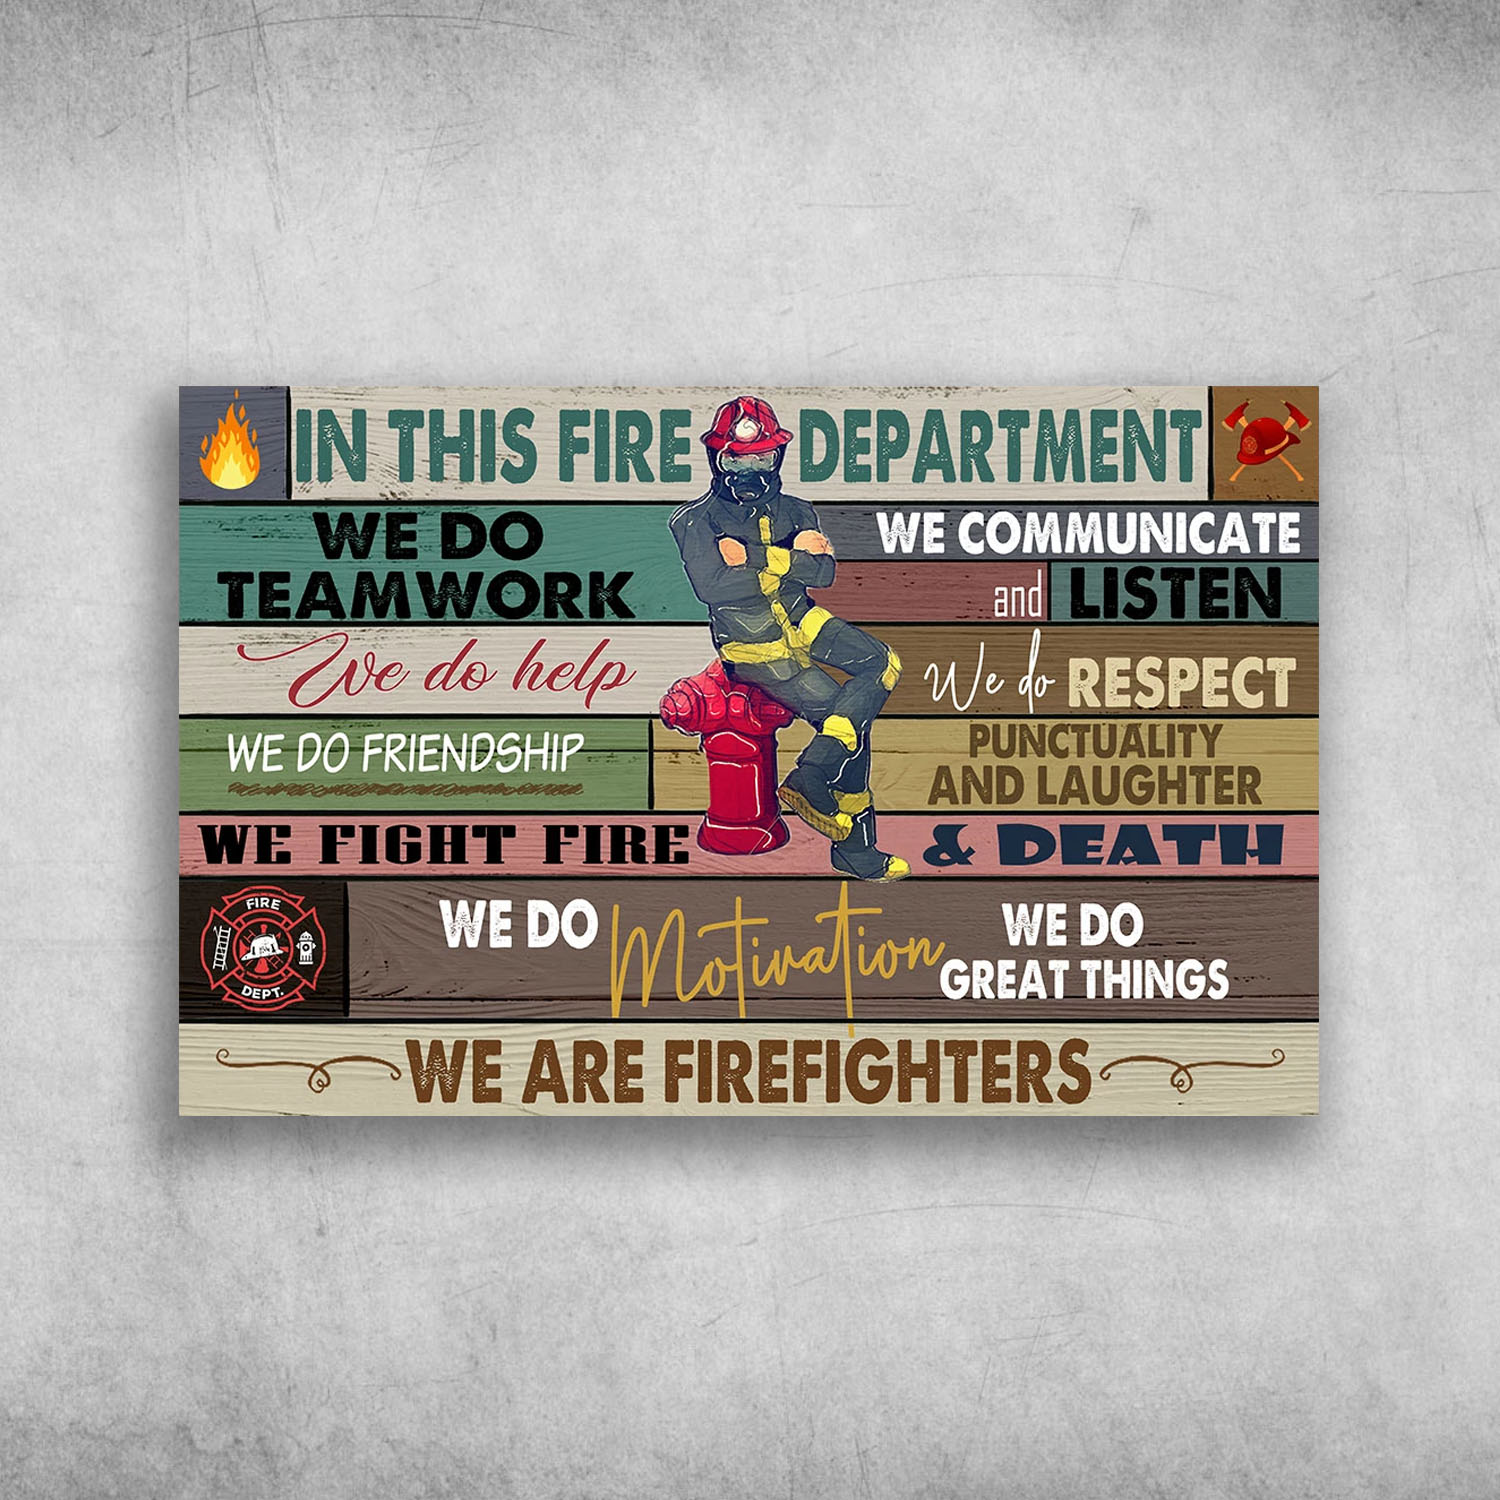 In This Fire Department We Are Firefighters We Fight Fire